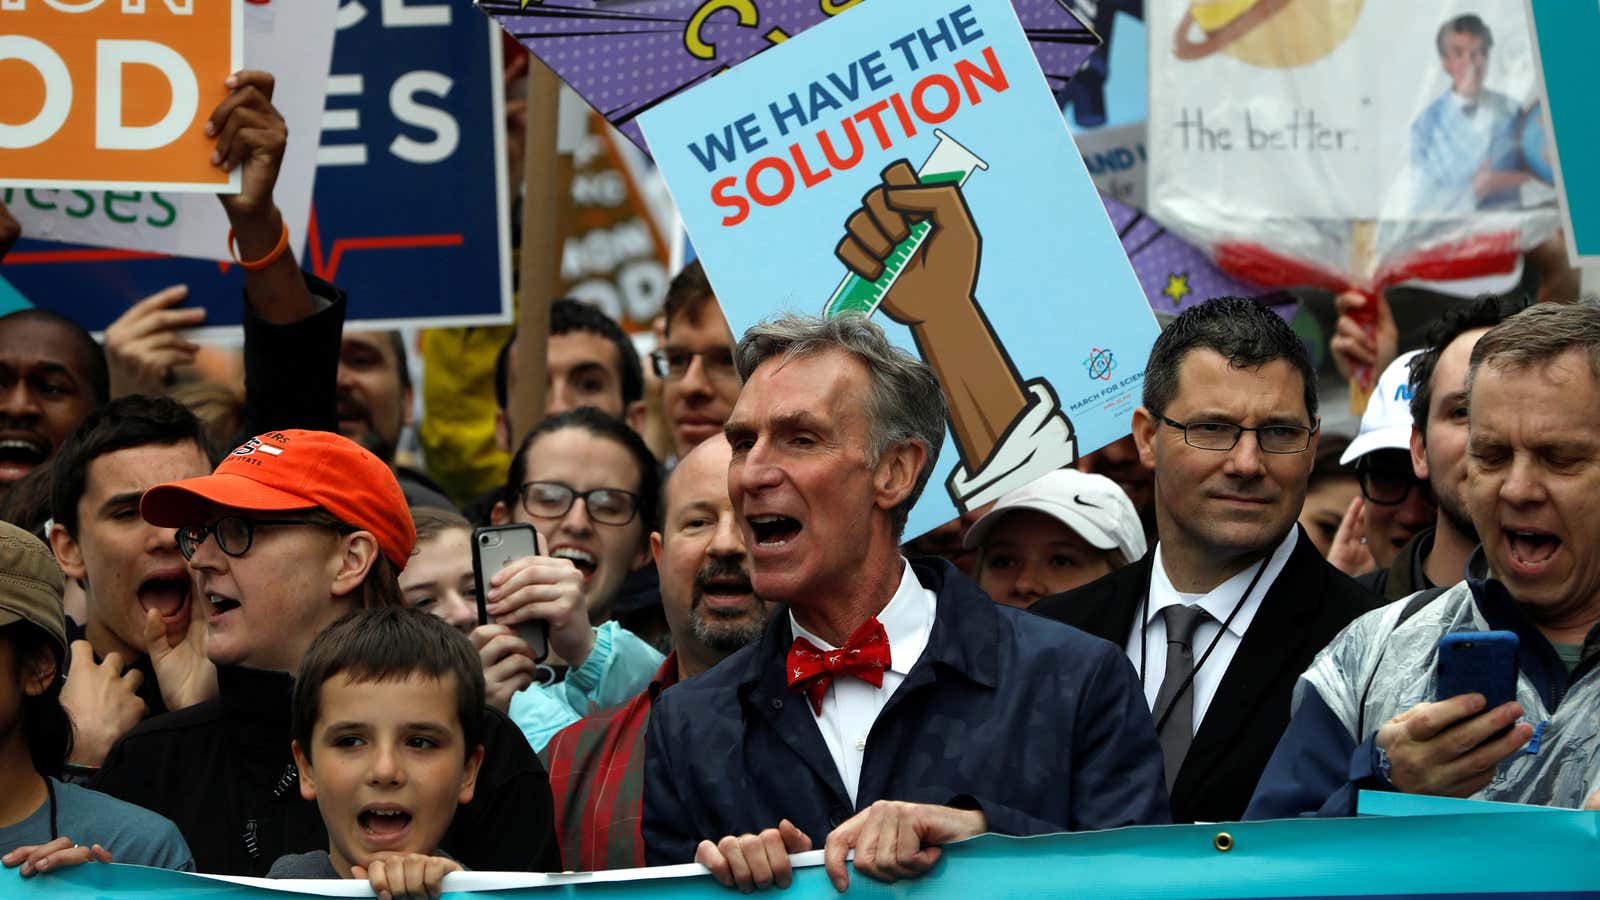 Bill Nye with his usual crowd.